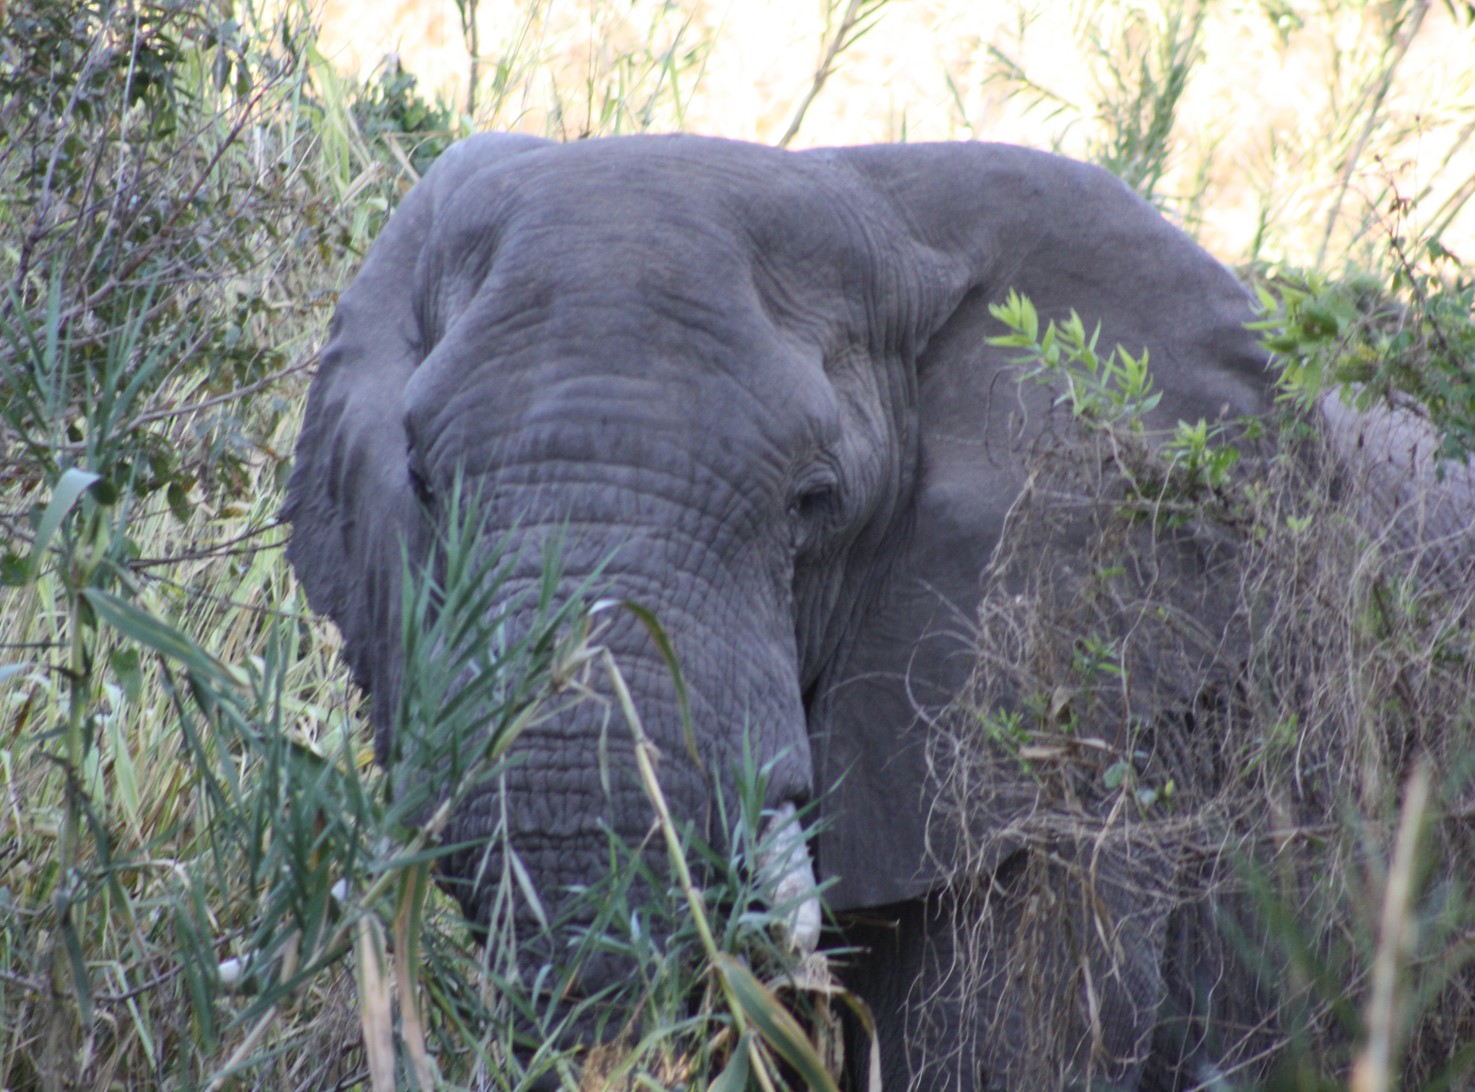 An African elephant in the wild of South Africa.